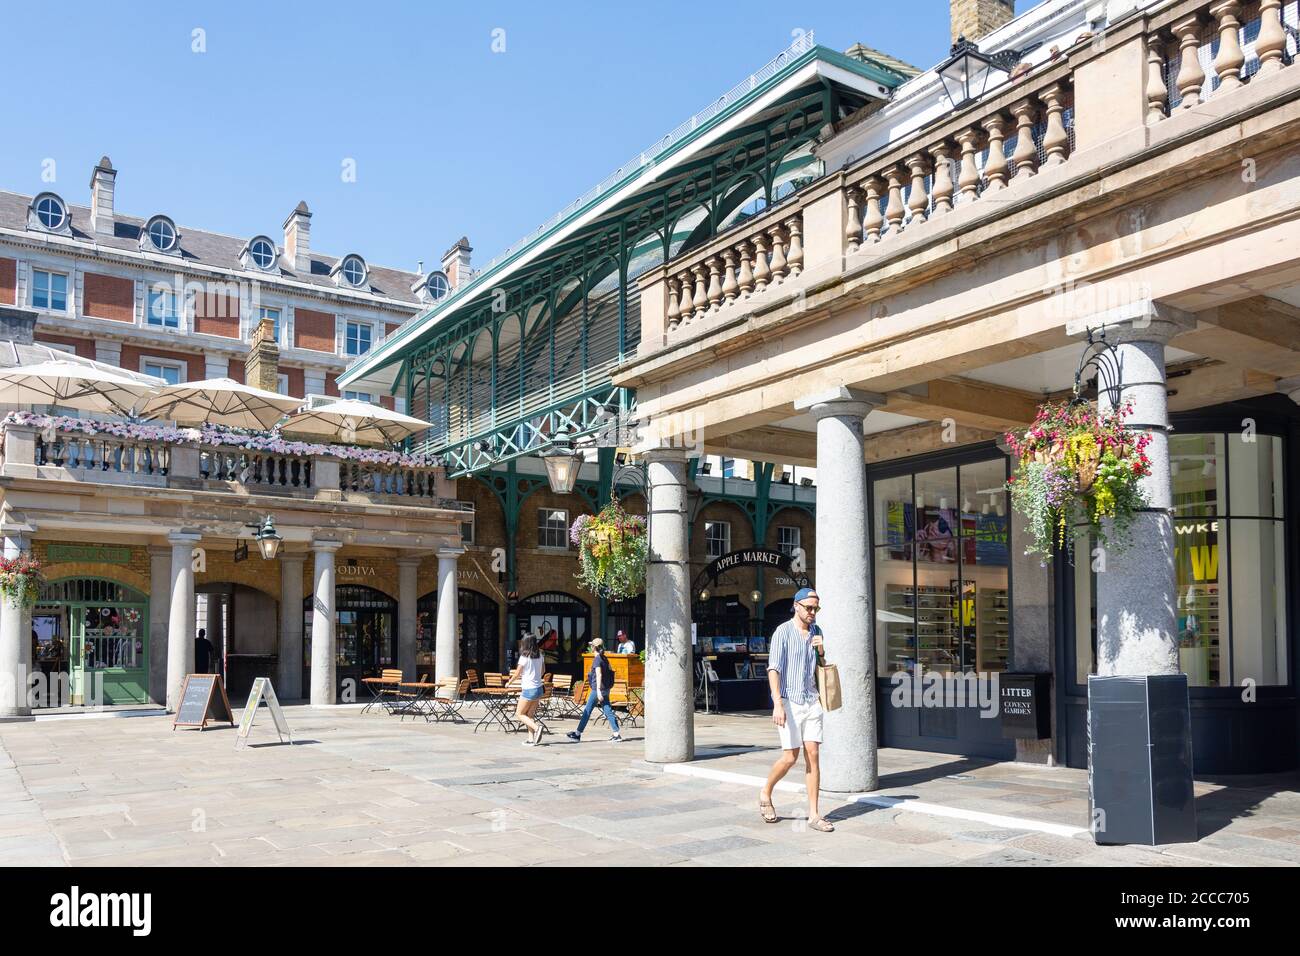 Apple Market, Covent Garden Market Square, Covent Garden, City of Westminster, Greater London, Inghilterra, Regno Unito Foto Stock